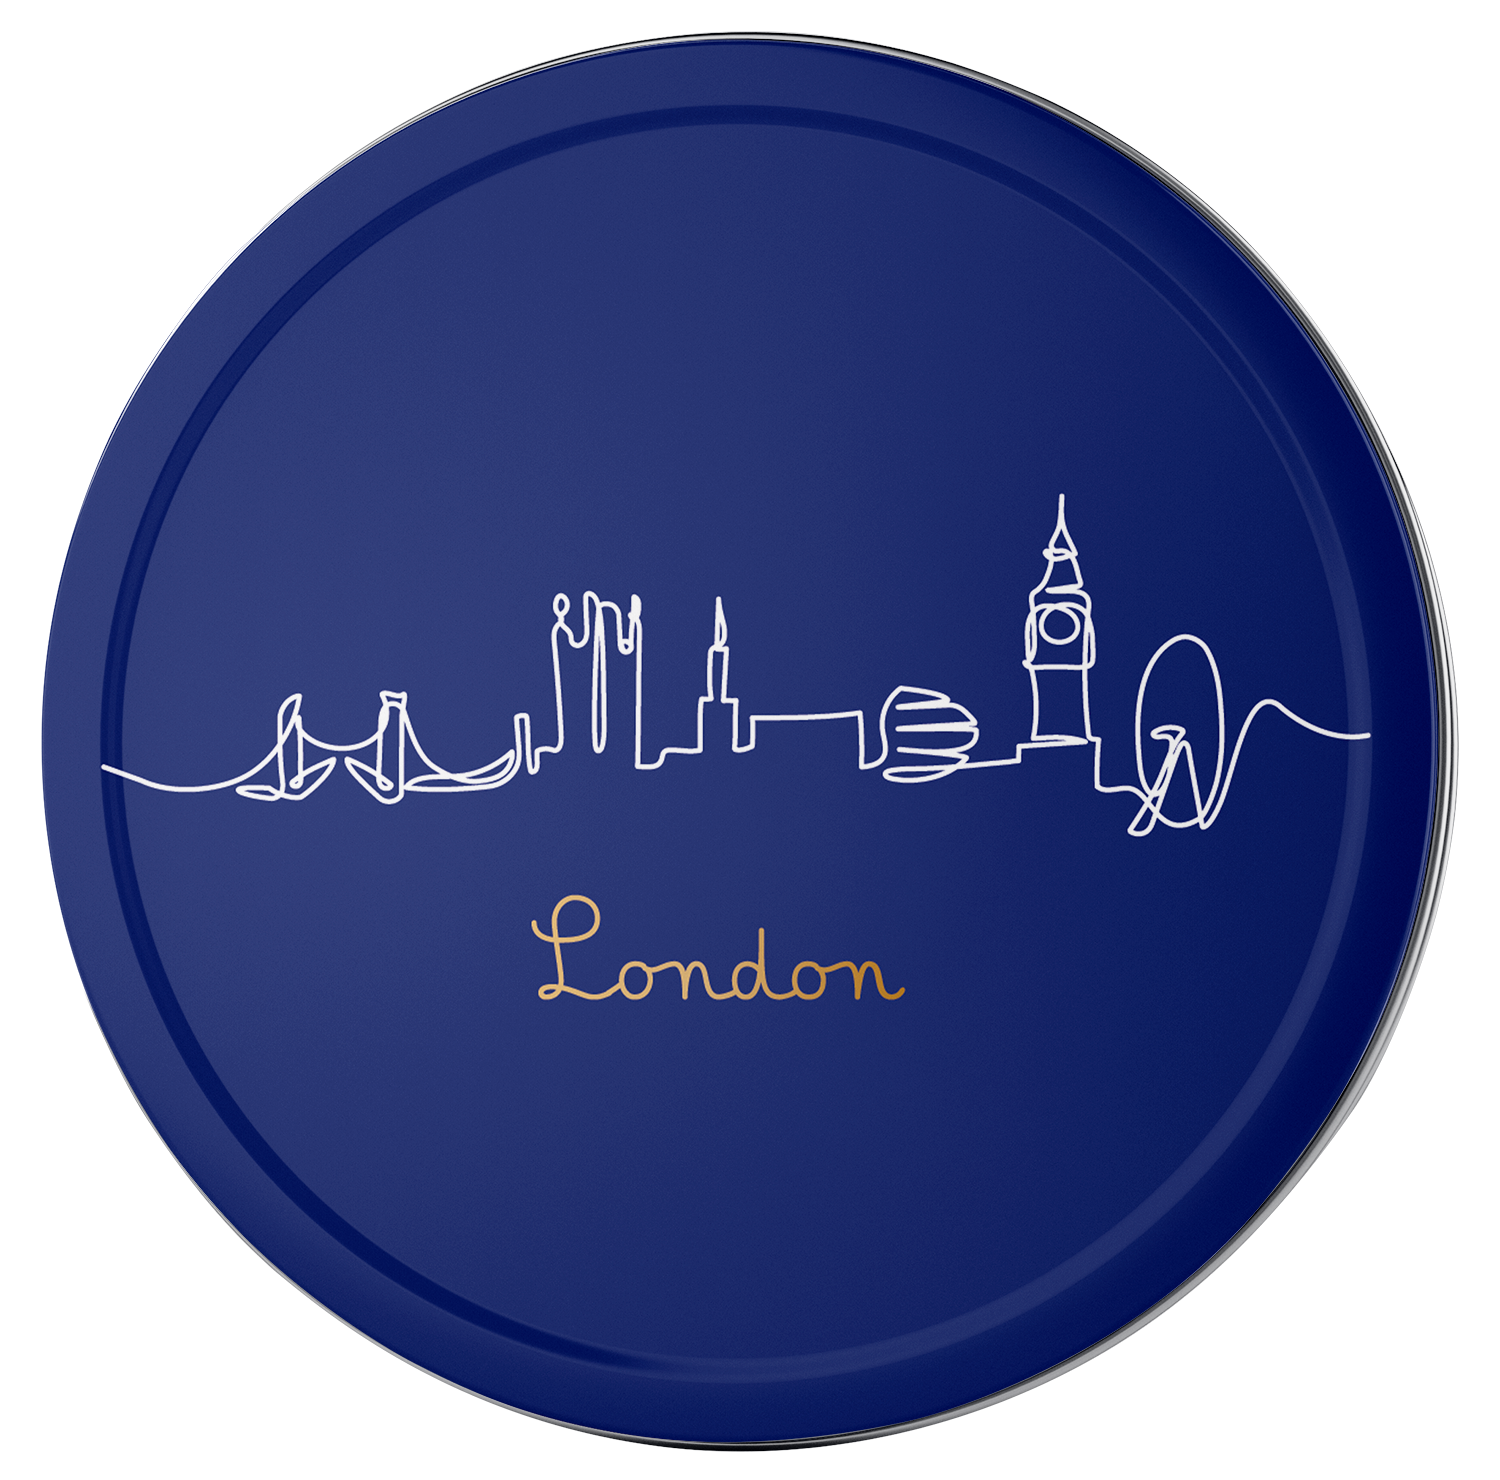 Cities Skyline Collection – Image